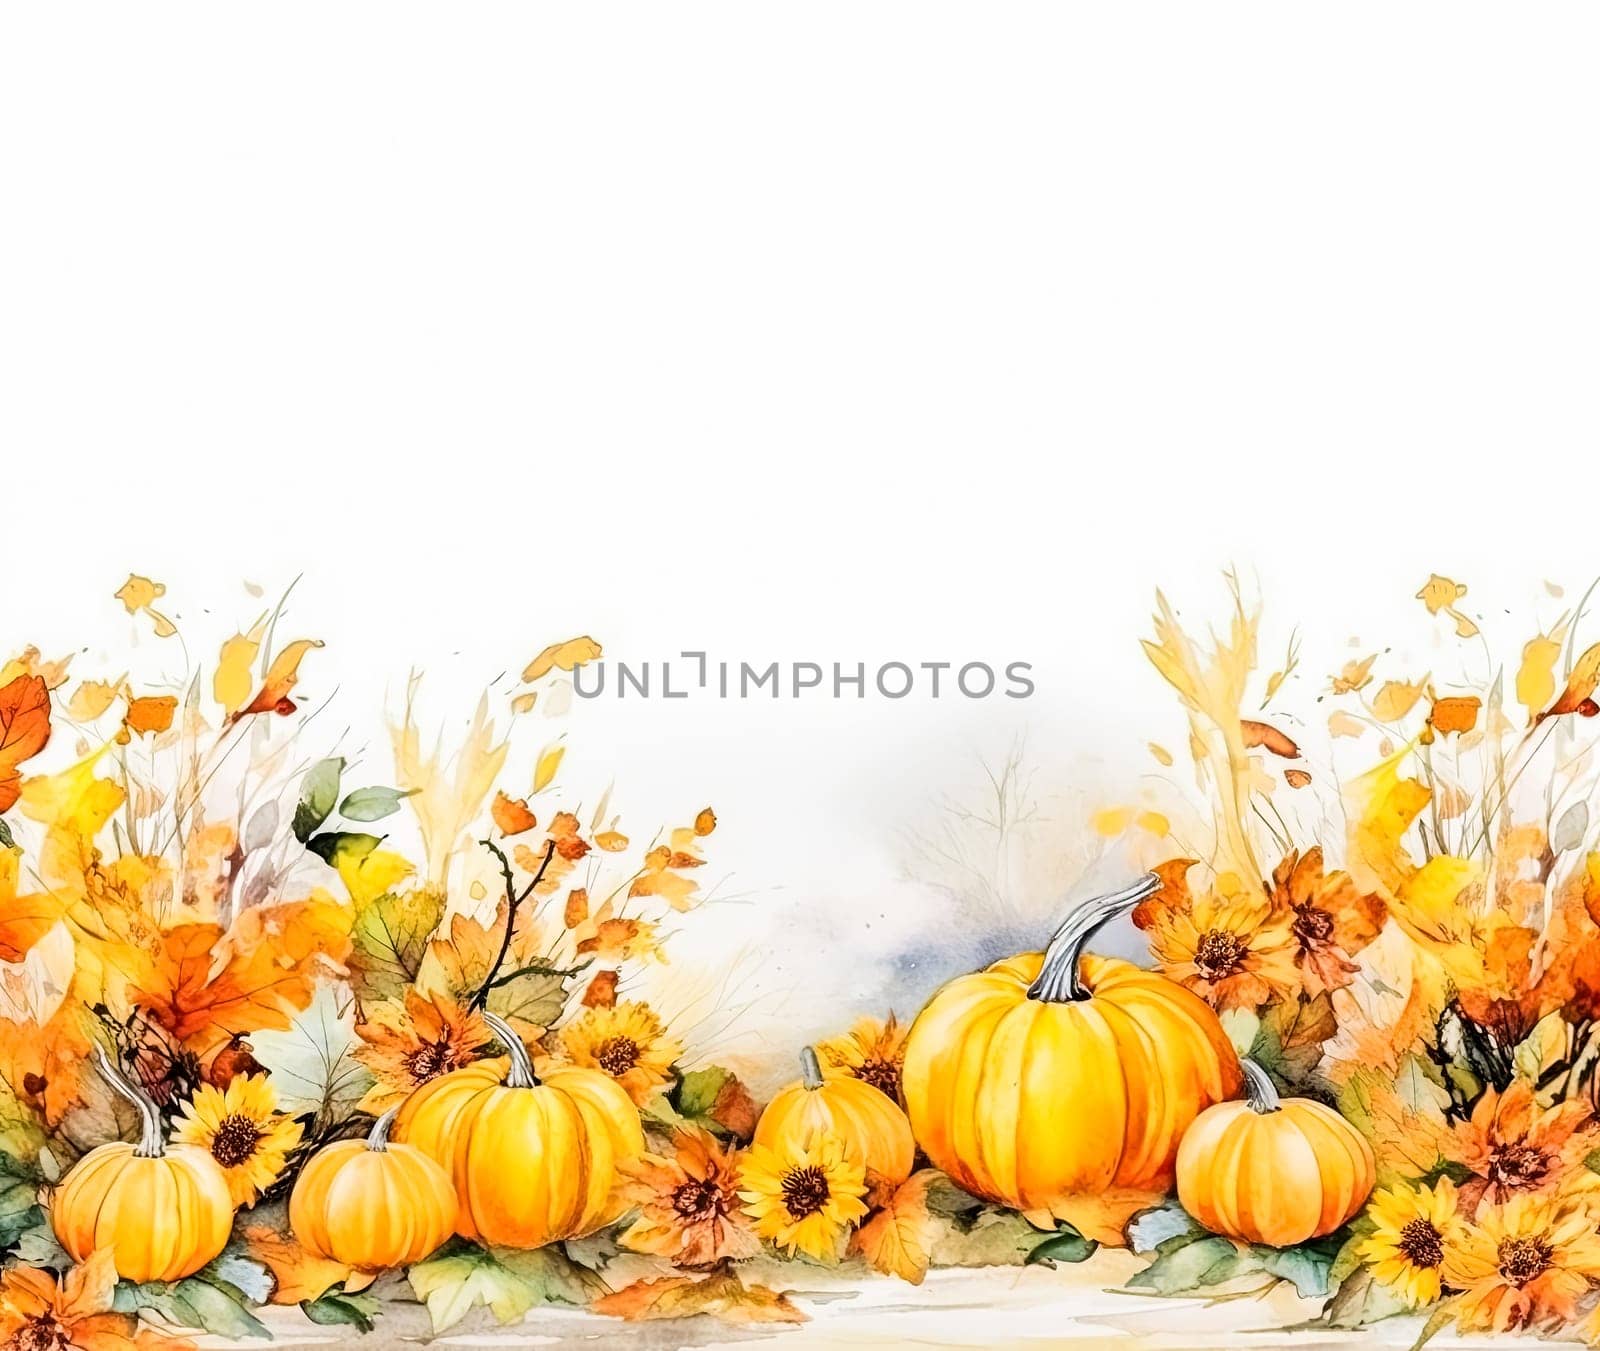 A painting of pumpkins and leaves with a white background. The painting has a warm and inviting mood, with the bright colors of the pumpkins and leaves creating a sense of autumn